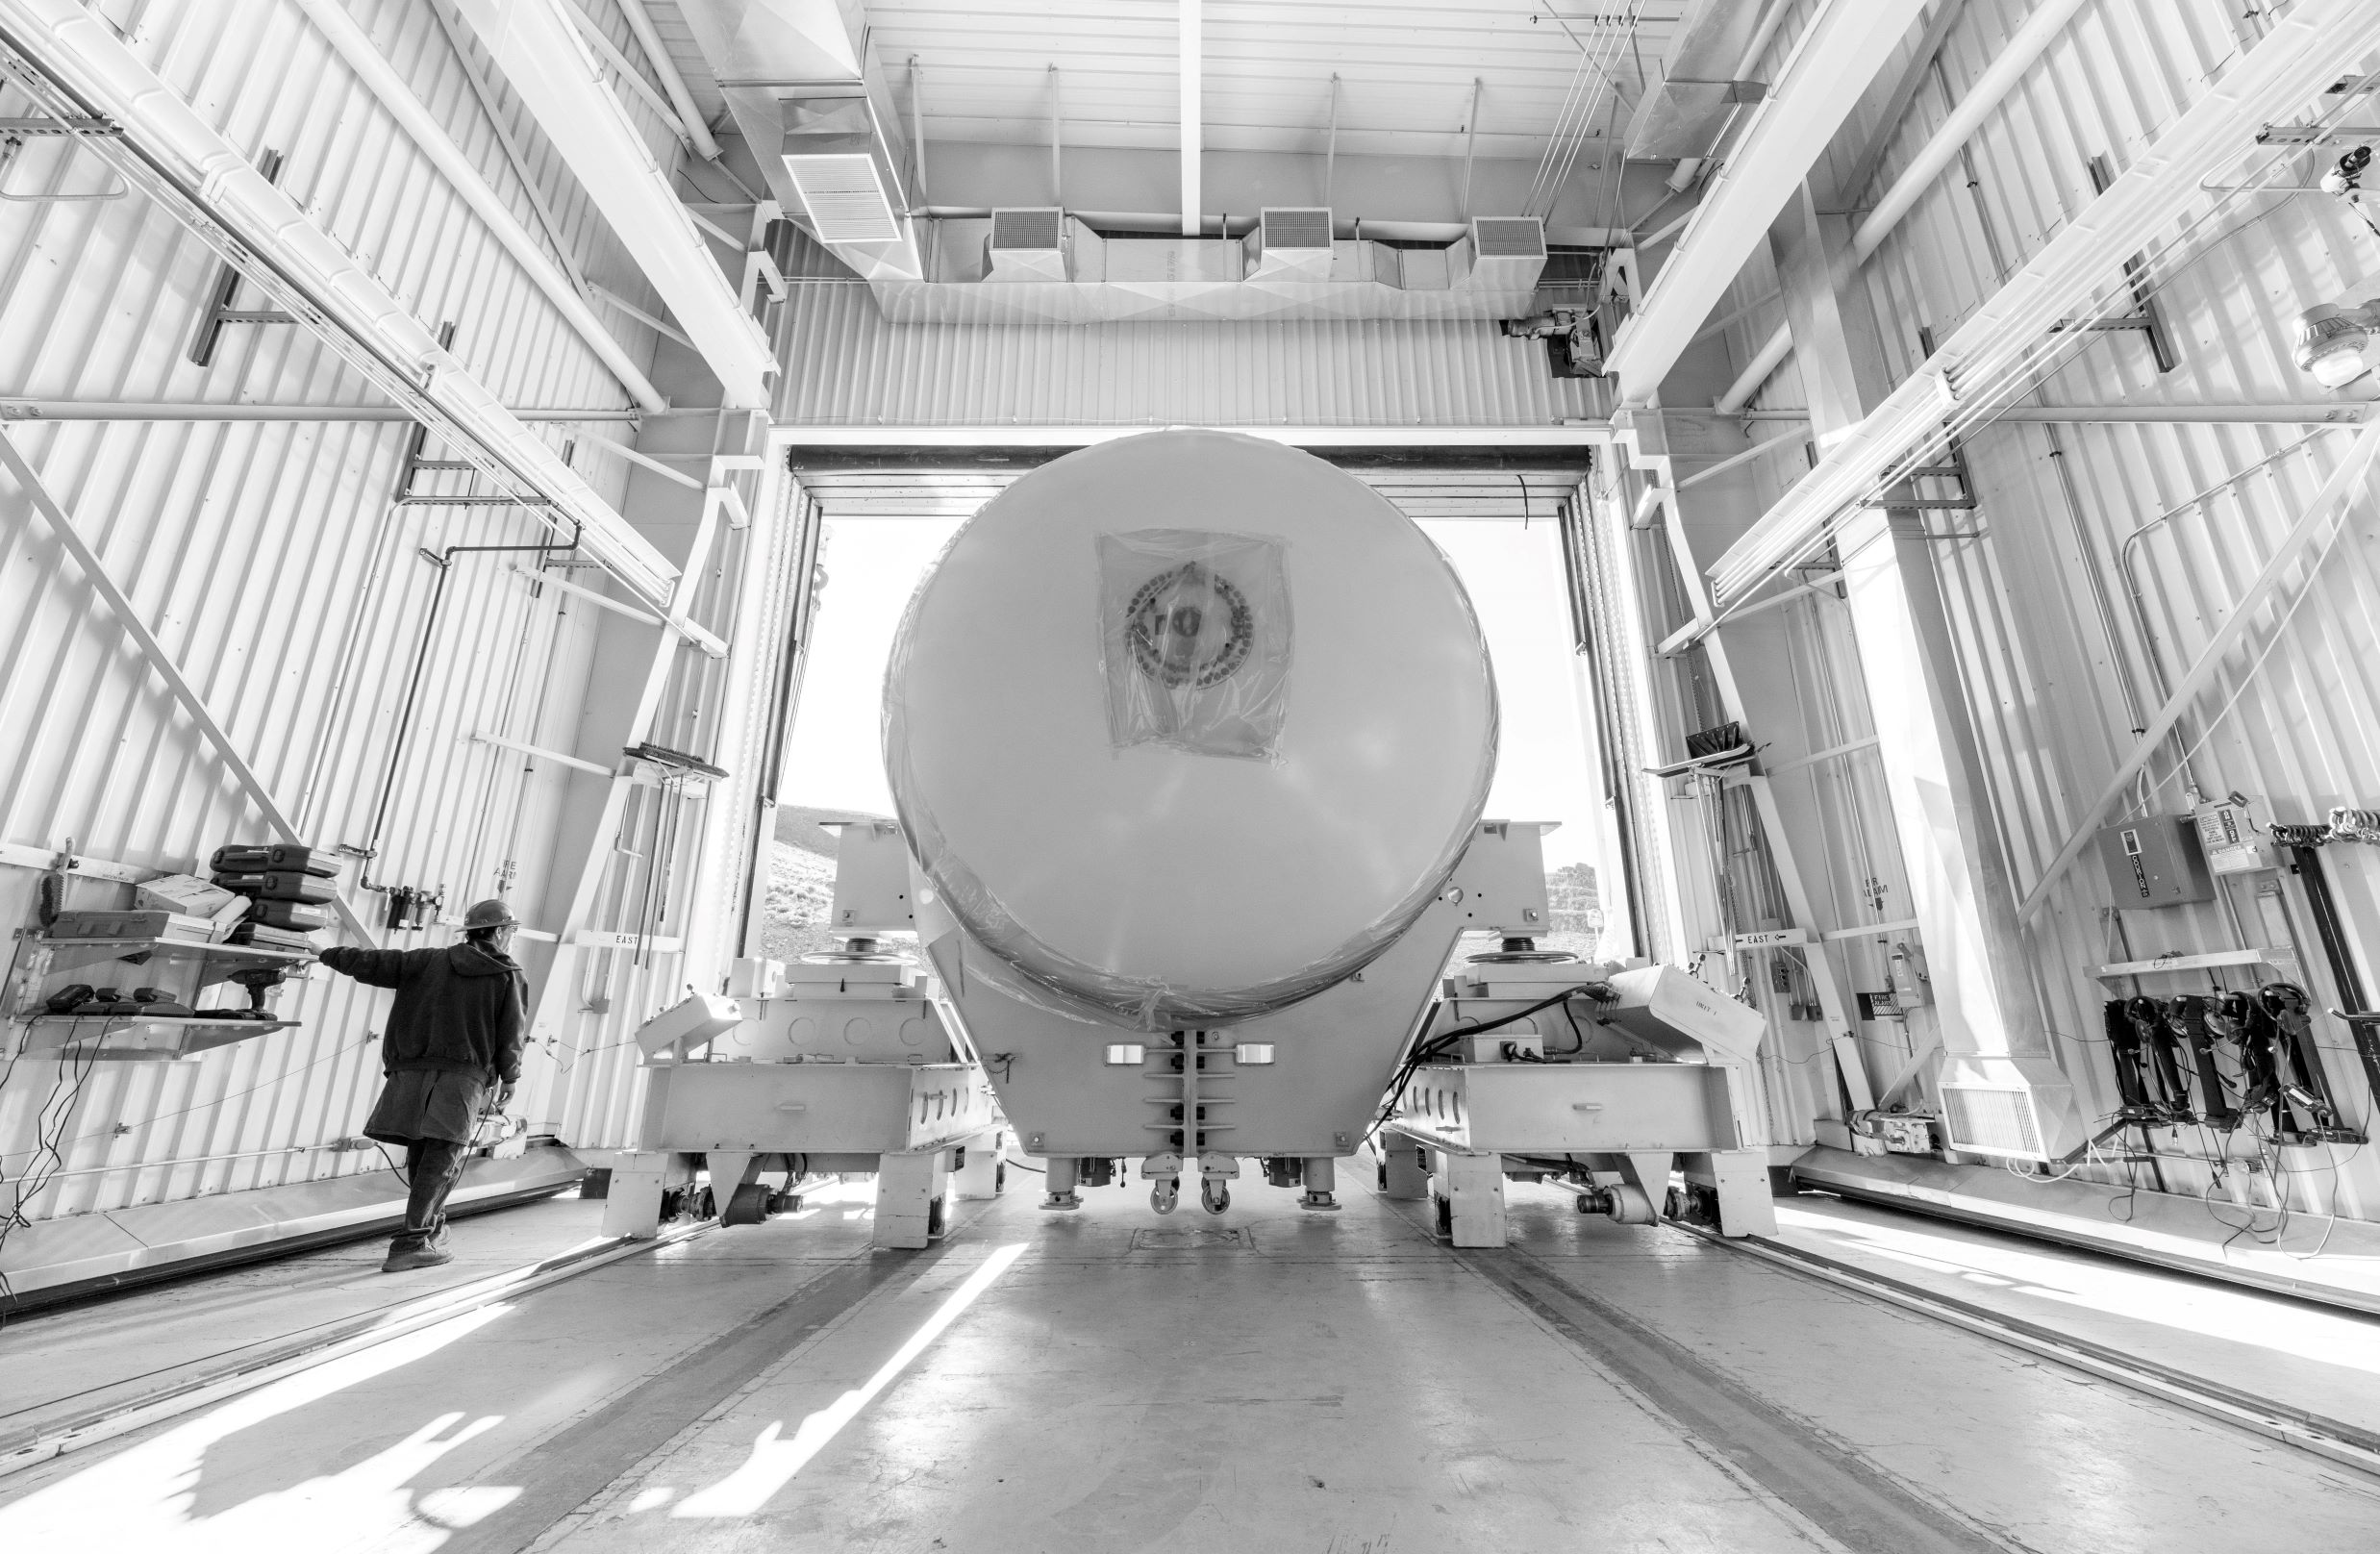 A forward segment of an SLS booster moves into the test bay.